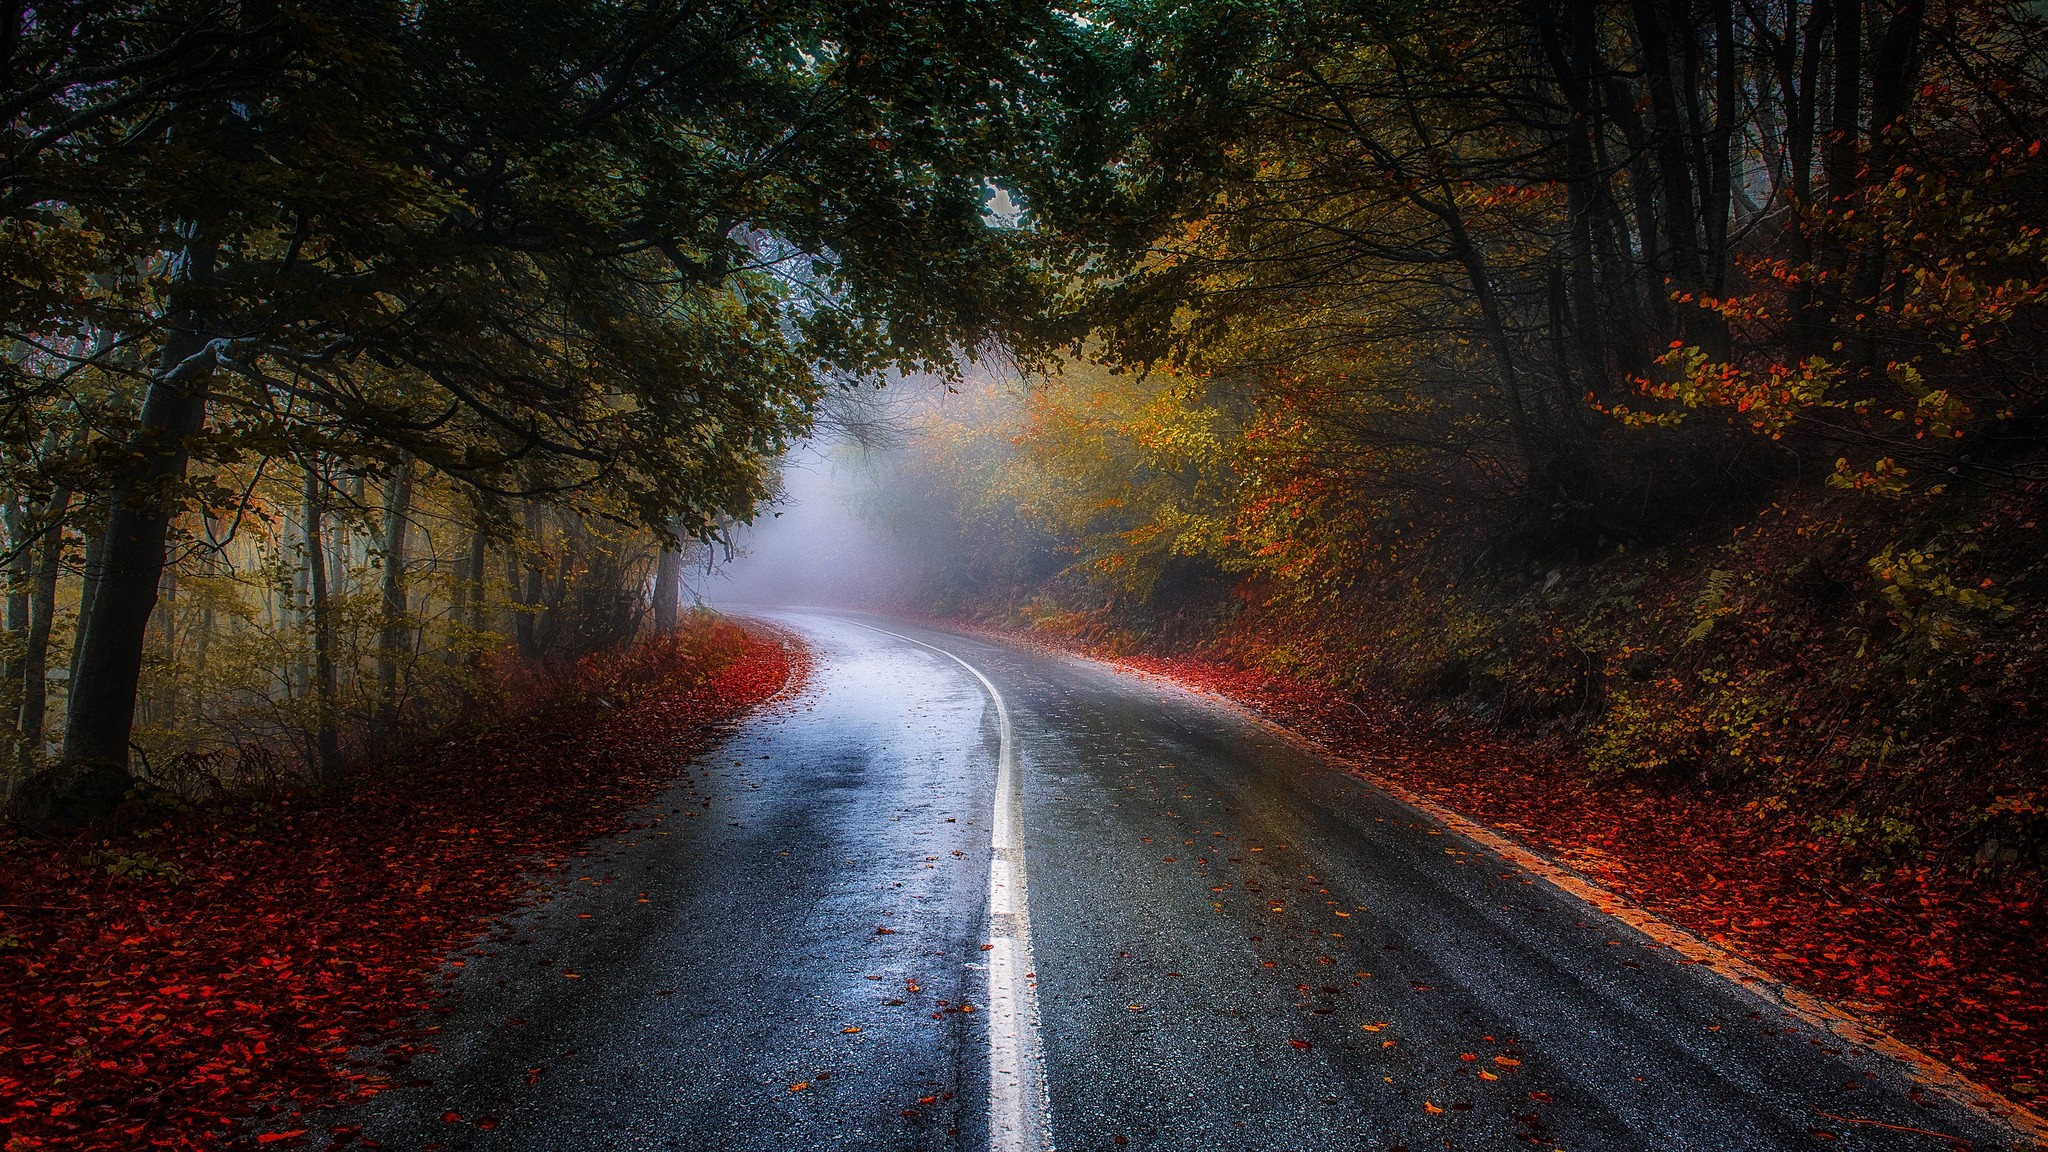 General 2048x1152 nature photography road forest mist morning sunlight trees fall leaves red blue shrubs Greece asphalt